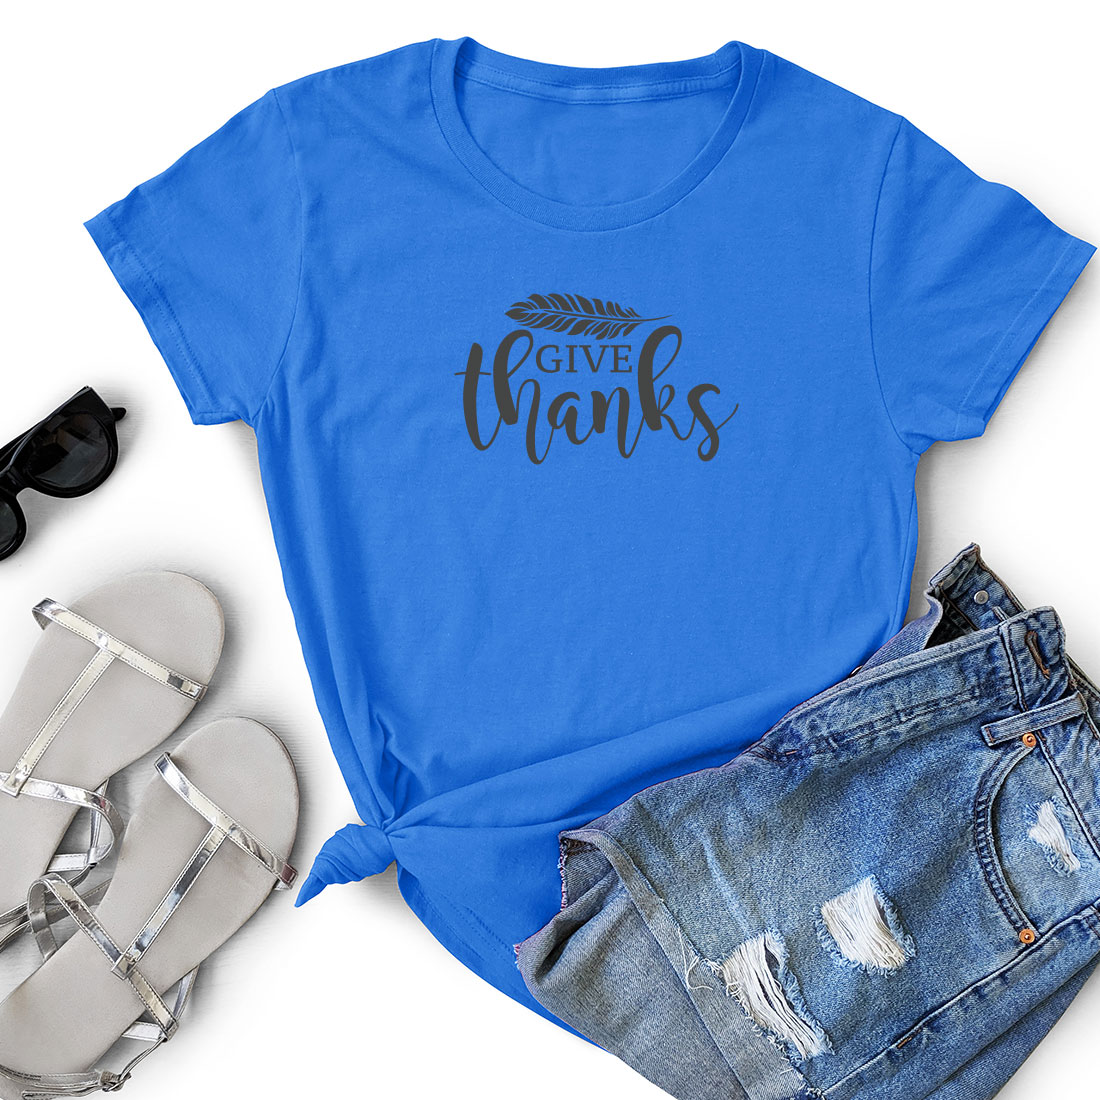 T - shirt that says give thanks next to a pair of shorts.